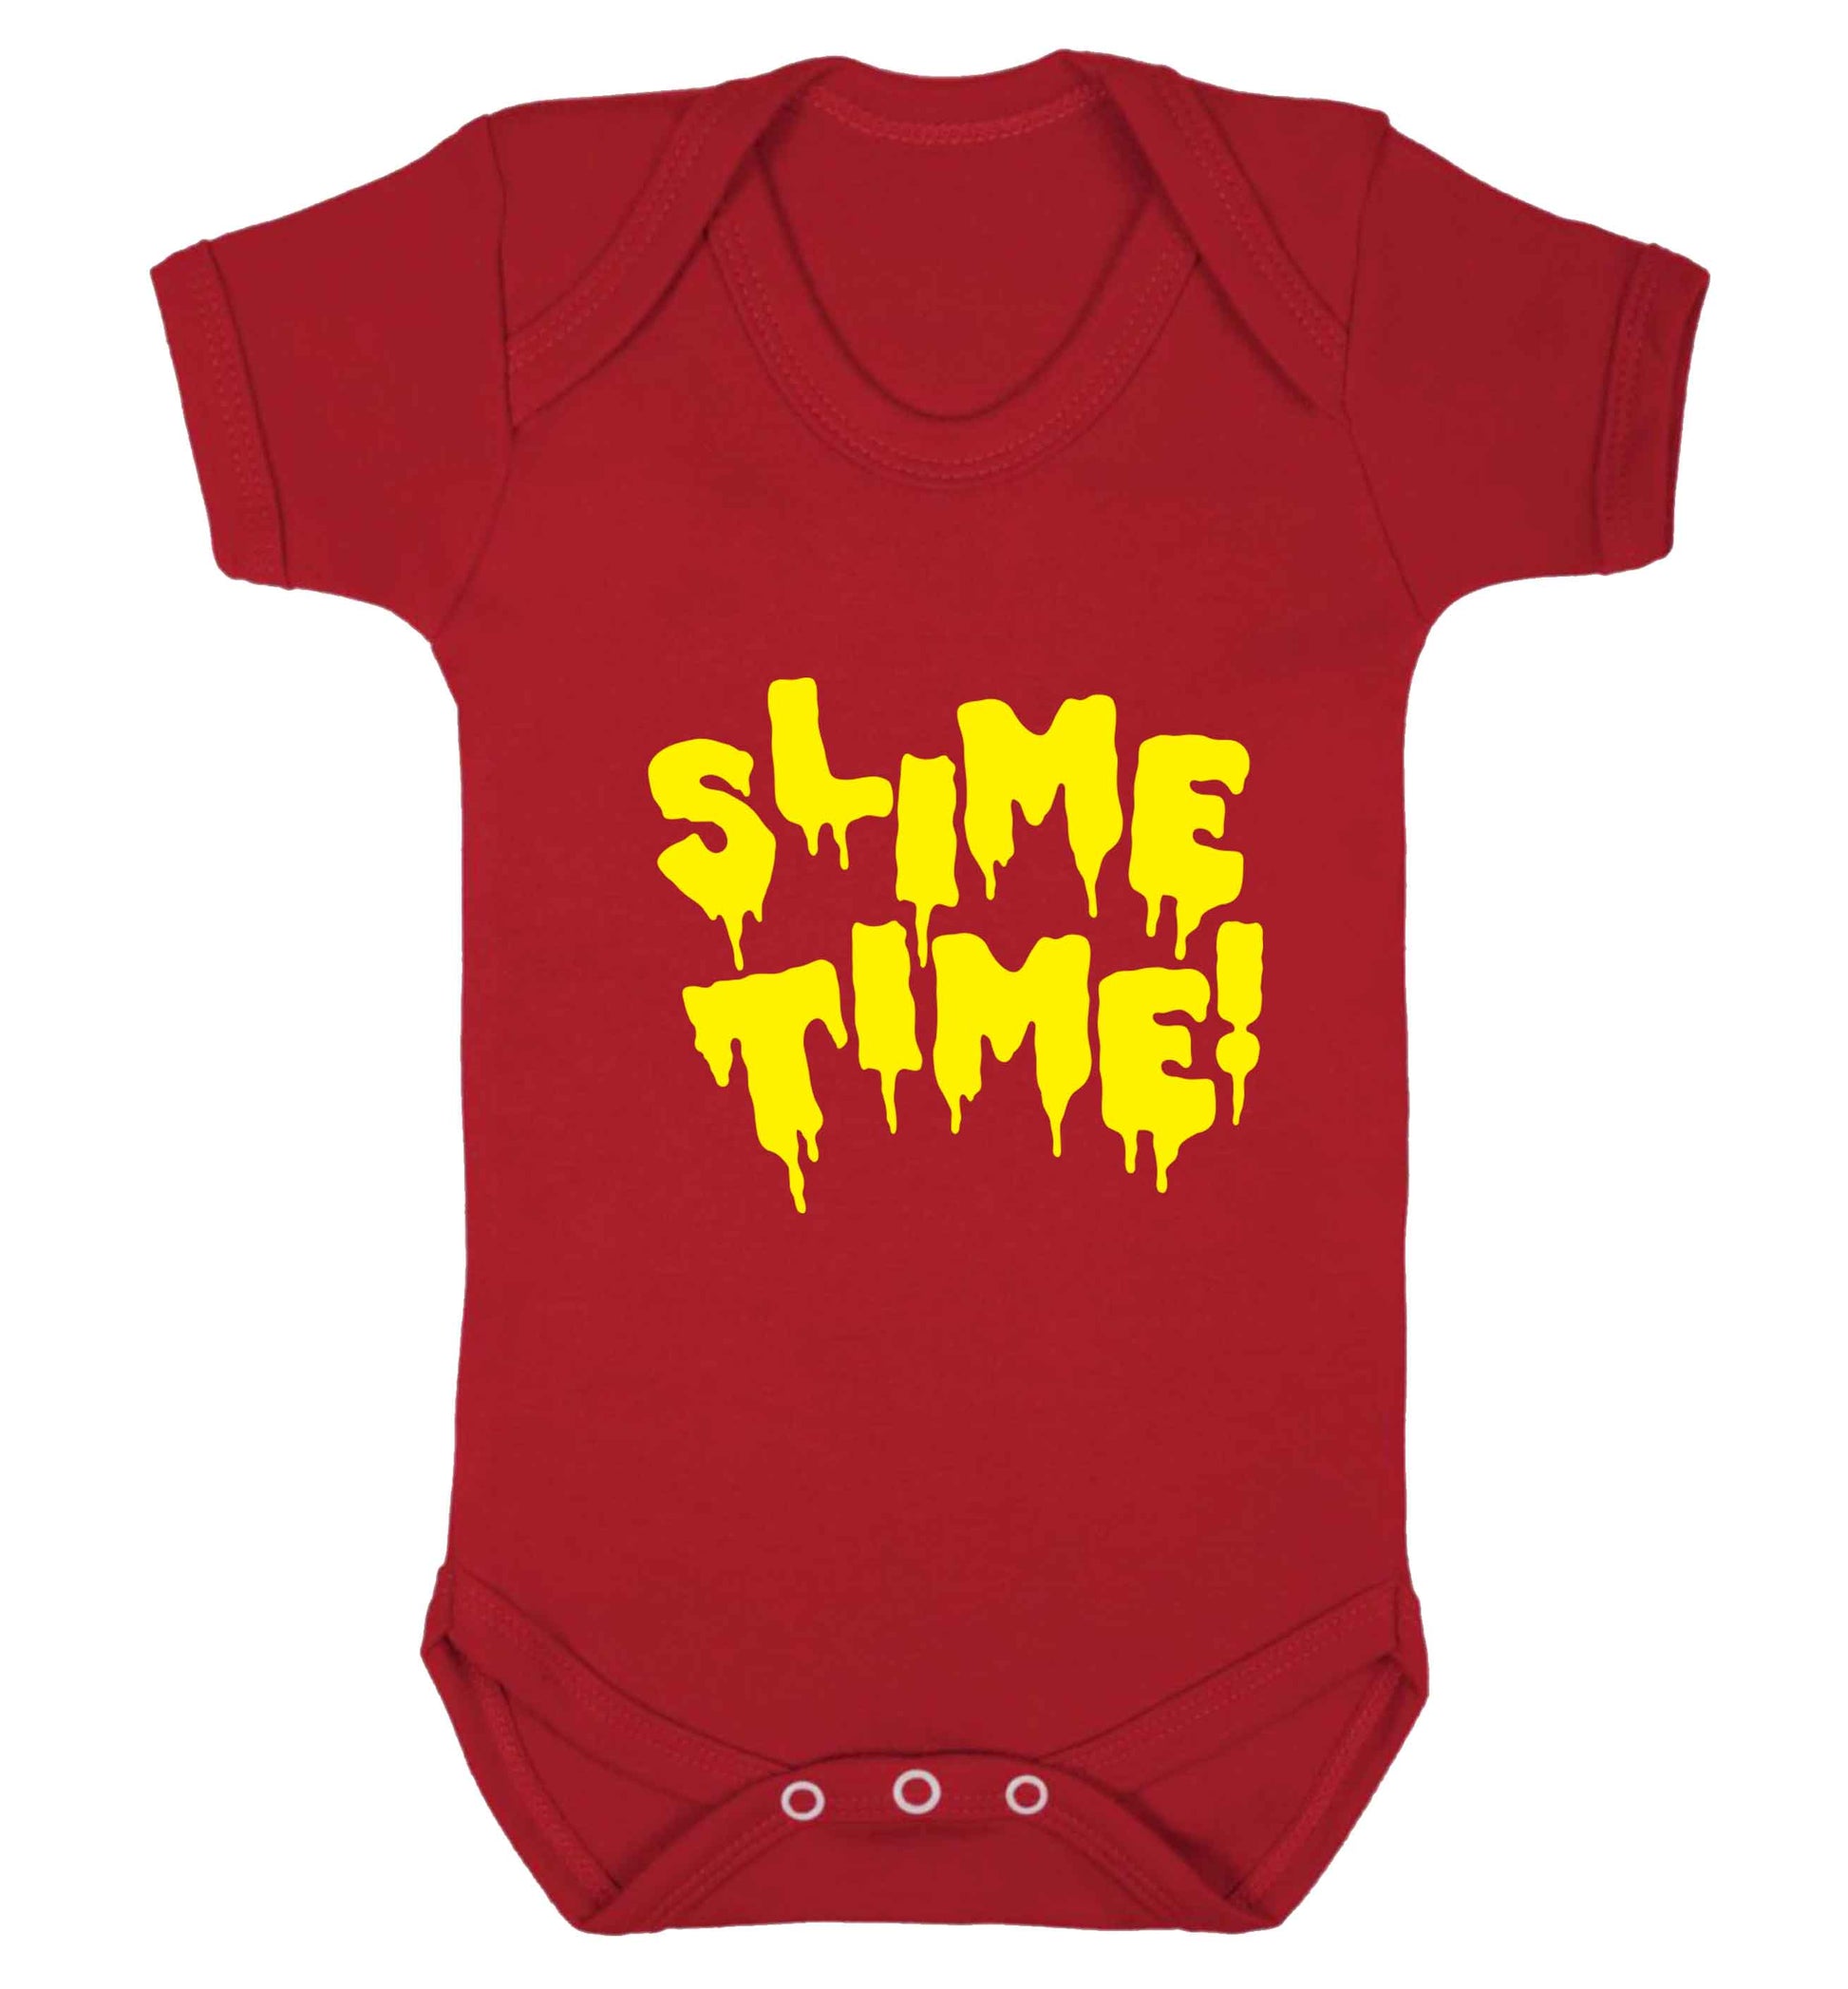 Neon yellow slime time baby vest red 18-24 months